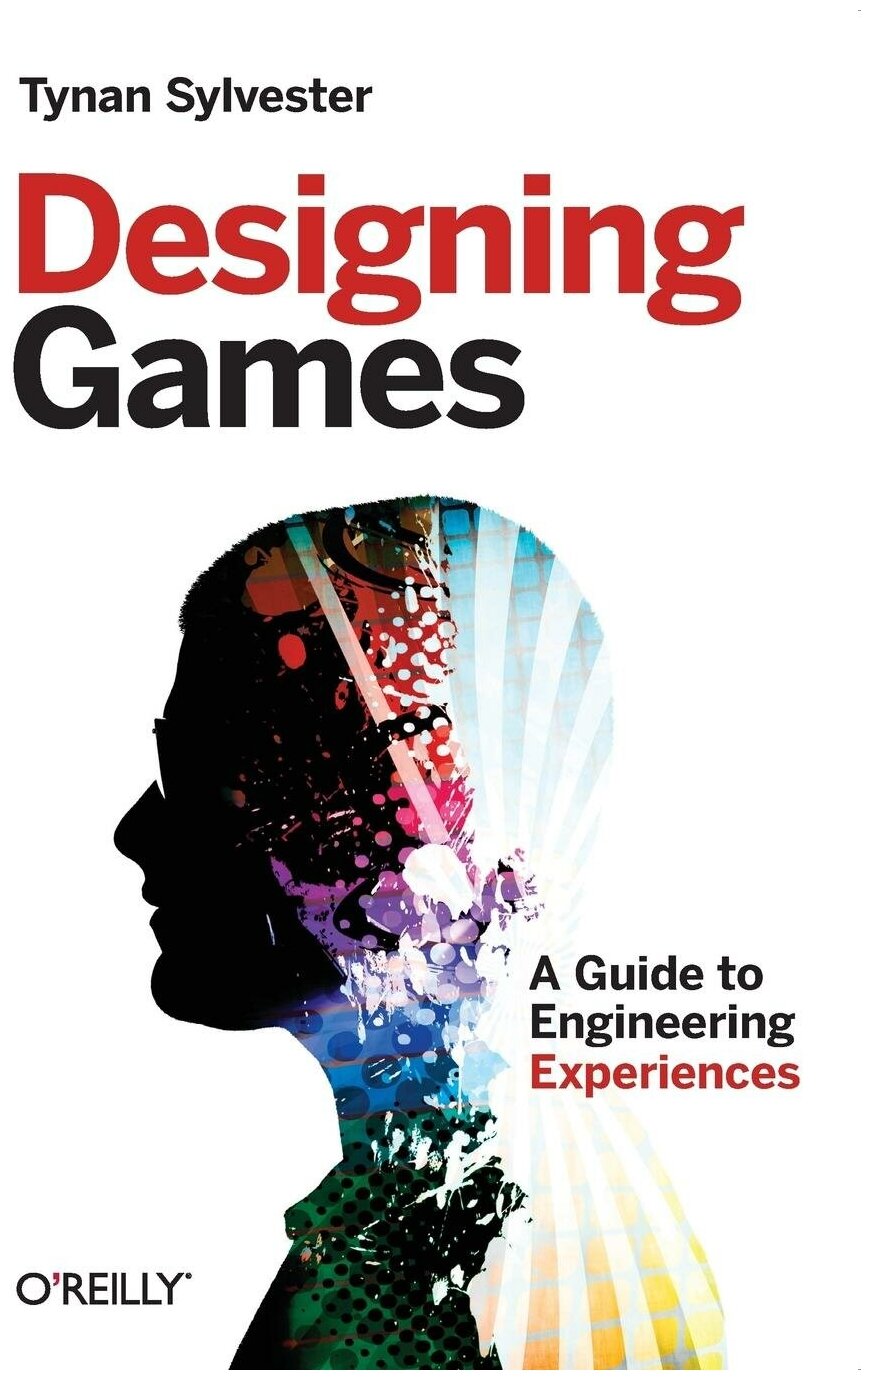 Designing Games. A Guide to Engineering Experiences